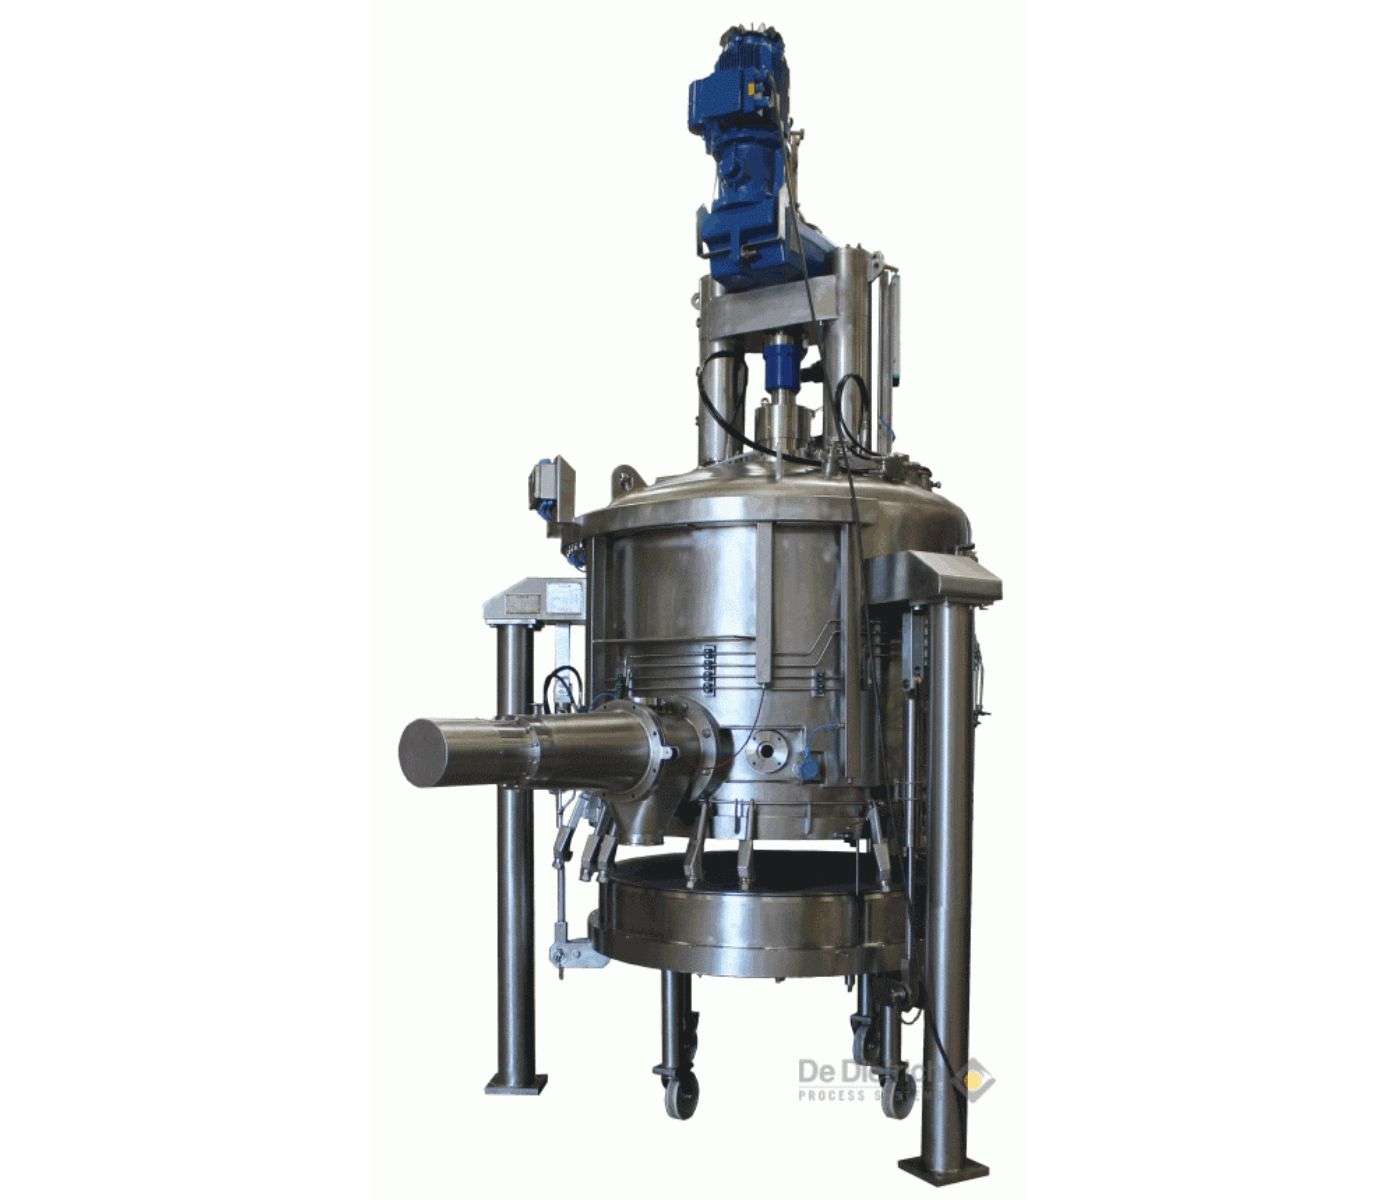 De Dietrich Process Systems India Private Limited